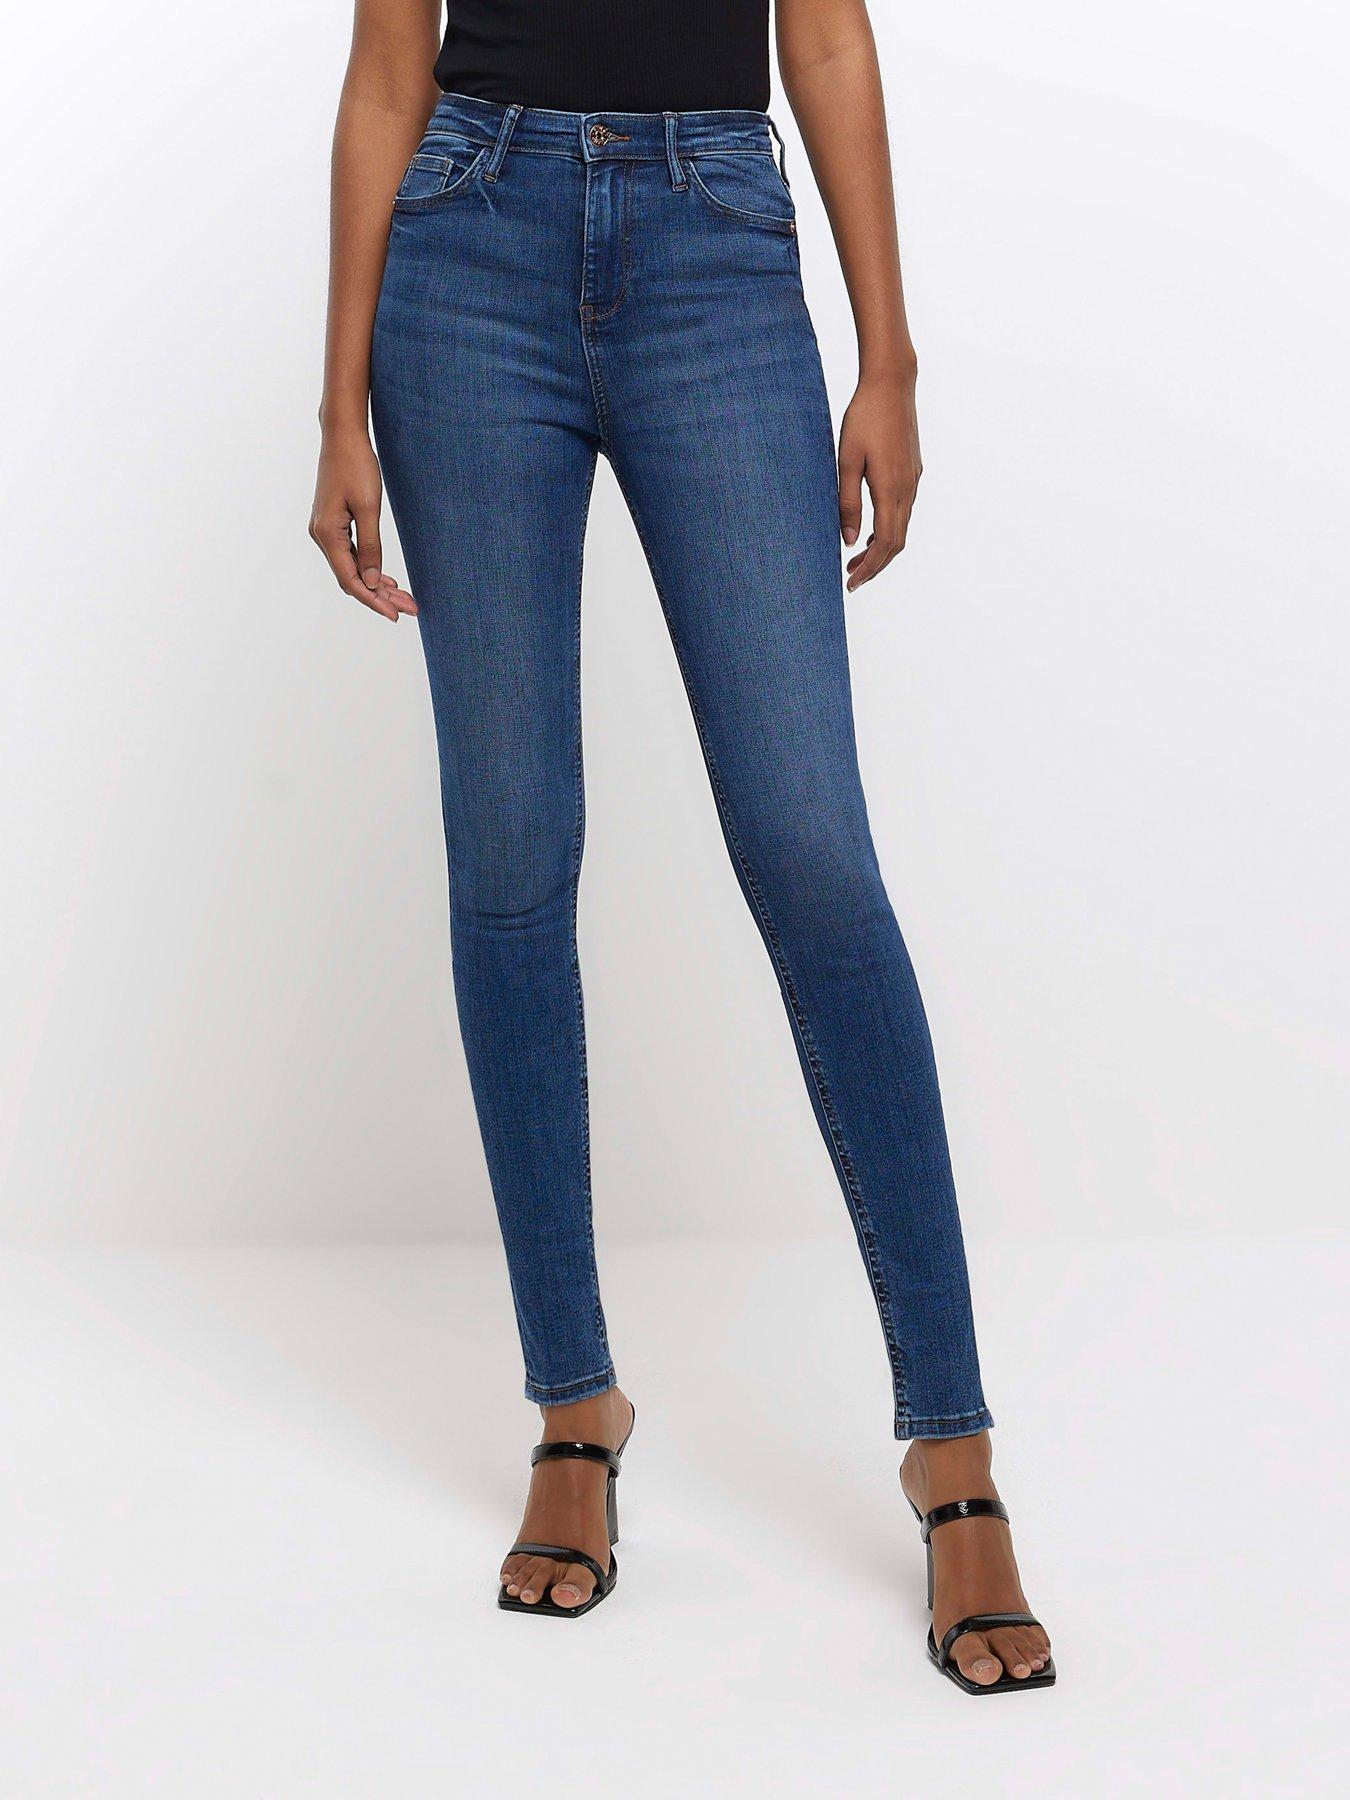 BN Style Your Curves: 8 Kinds of Jeans You Need to Own & How to